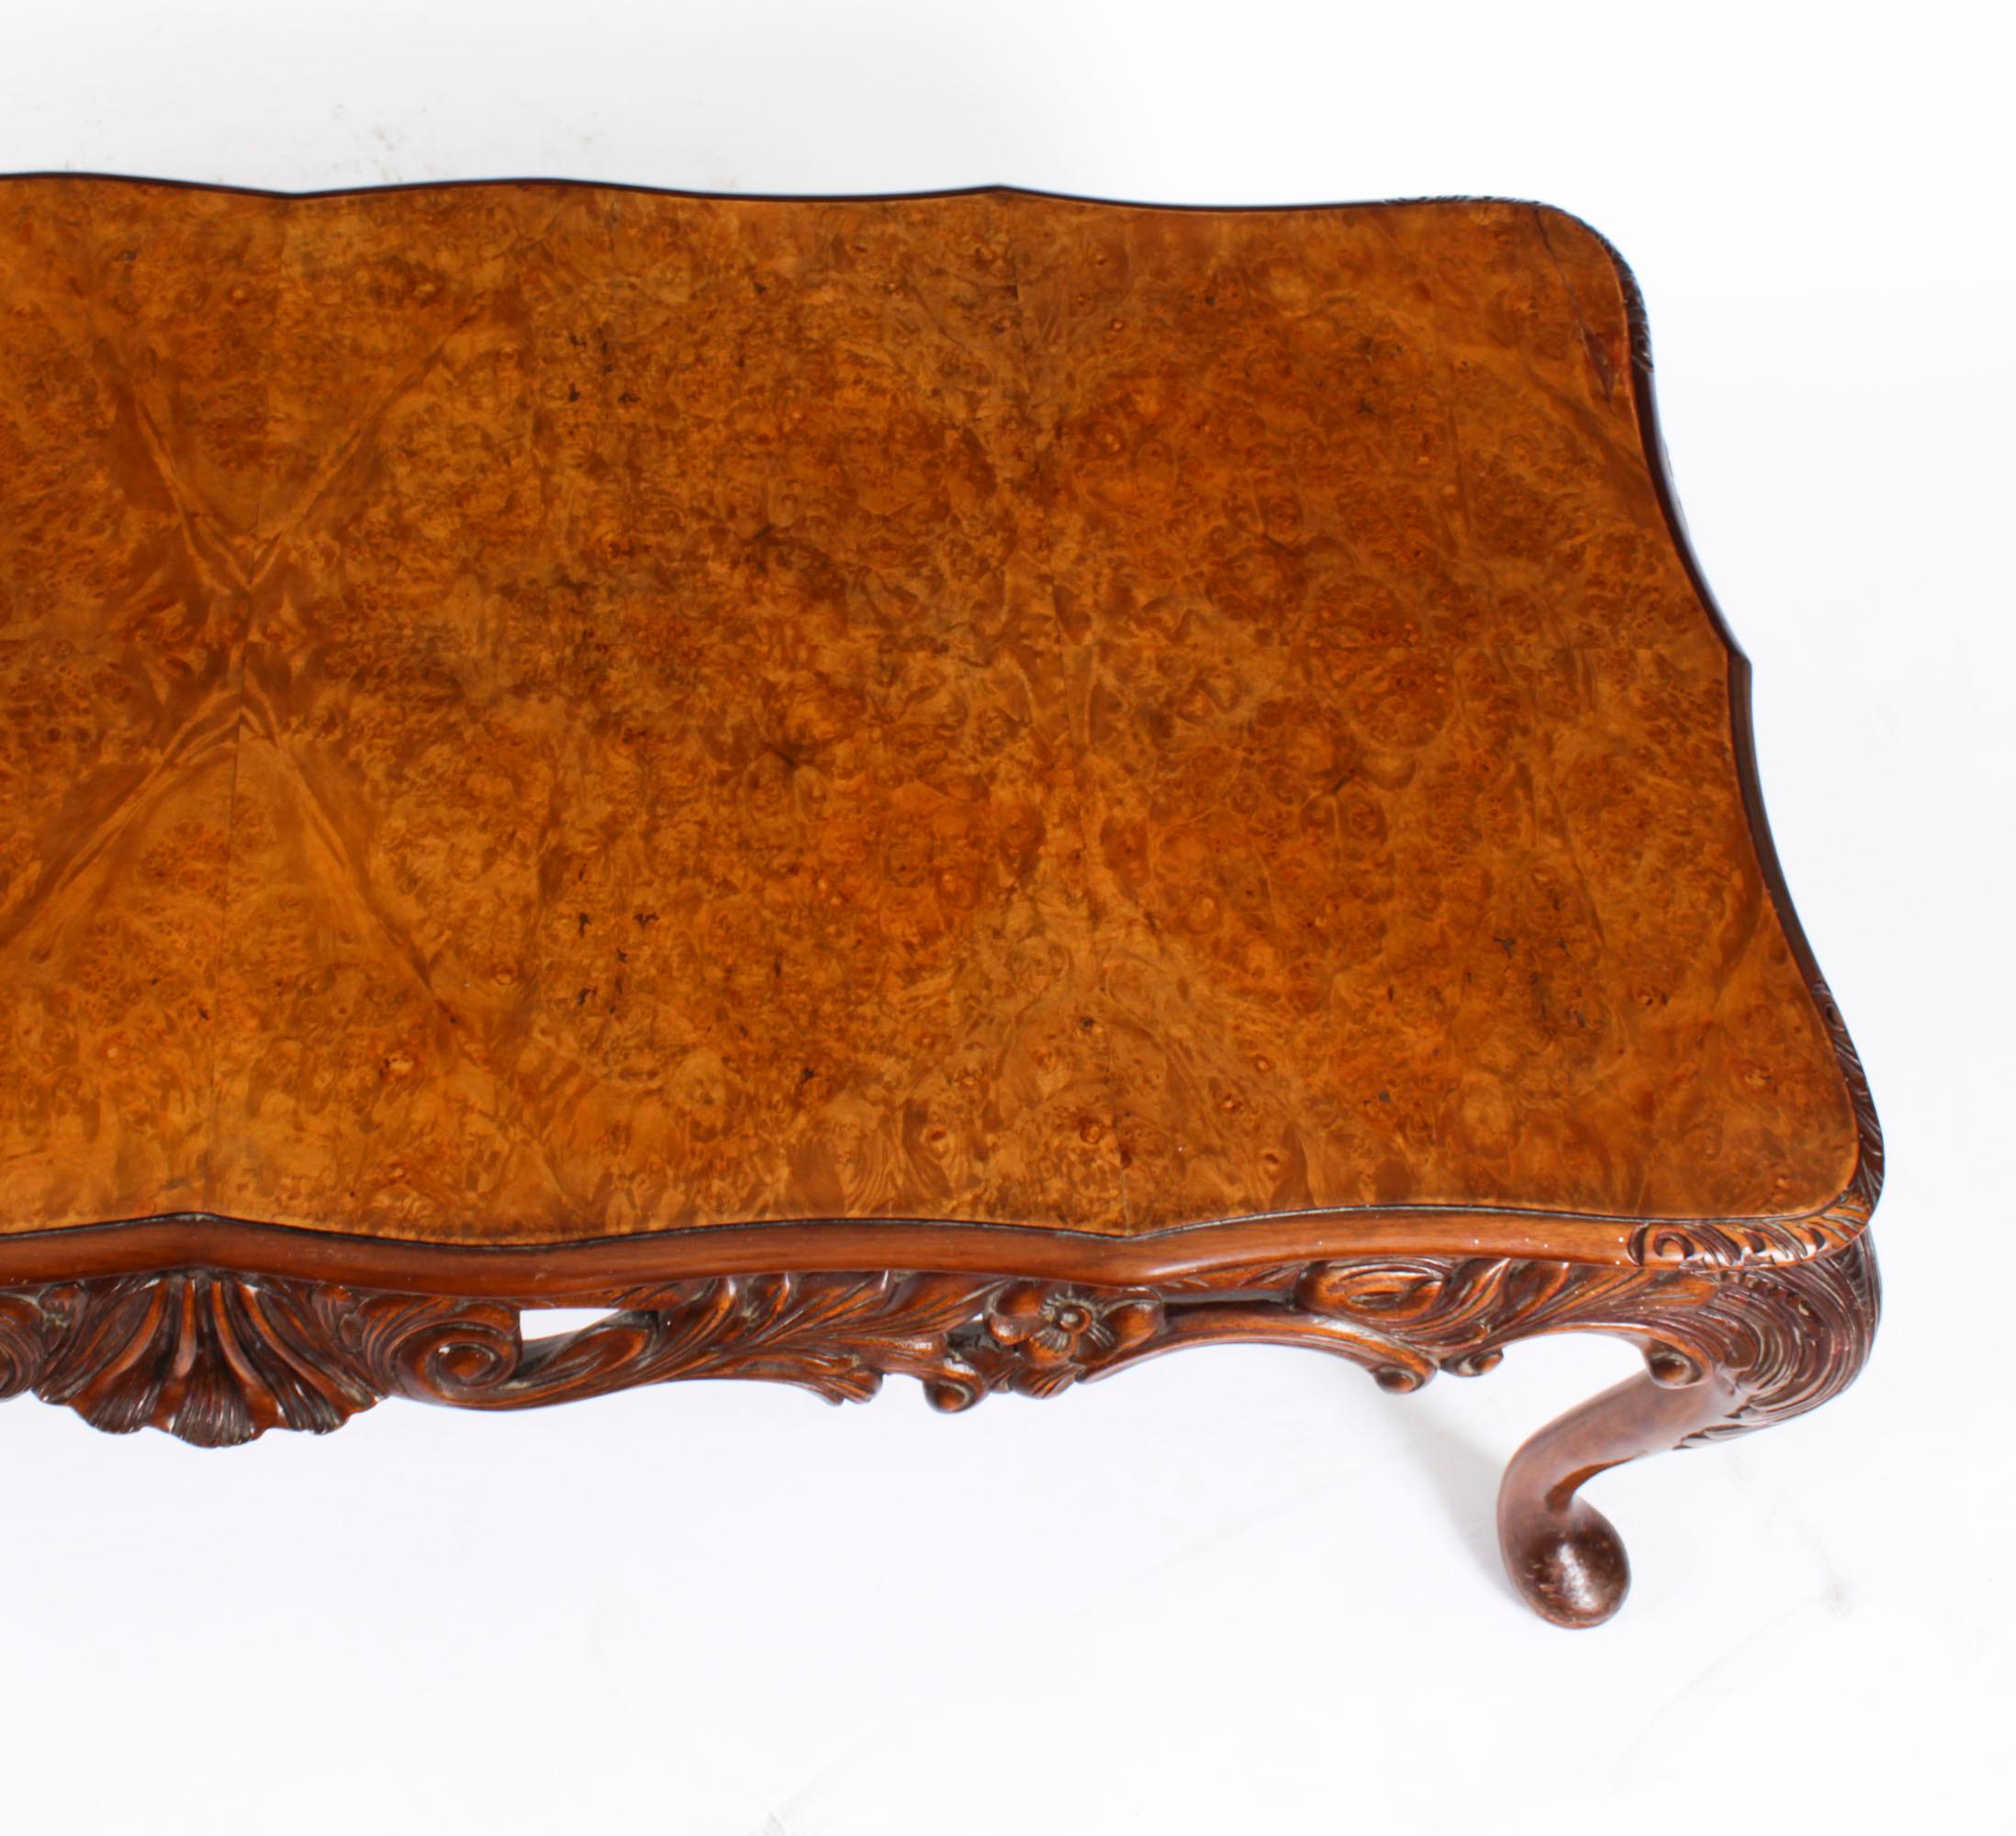 20th Century Antique Queen Anne Revival Burr Walnut Coffee Table c.1920 For Sale